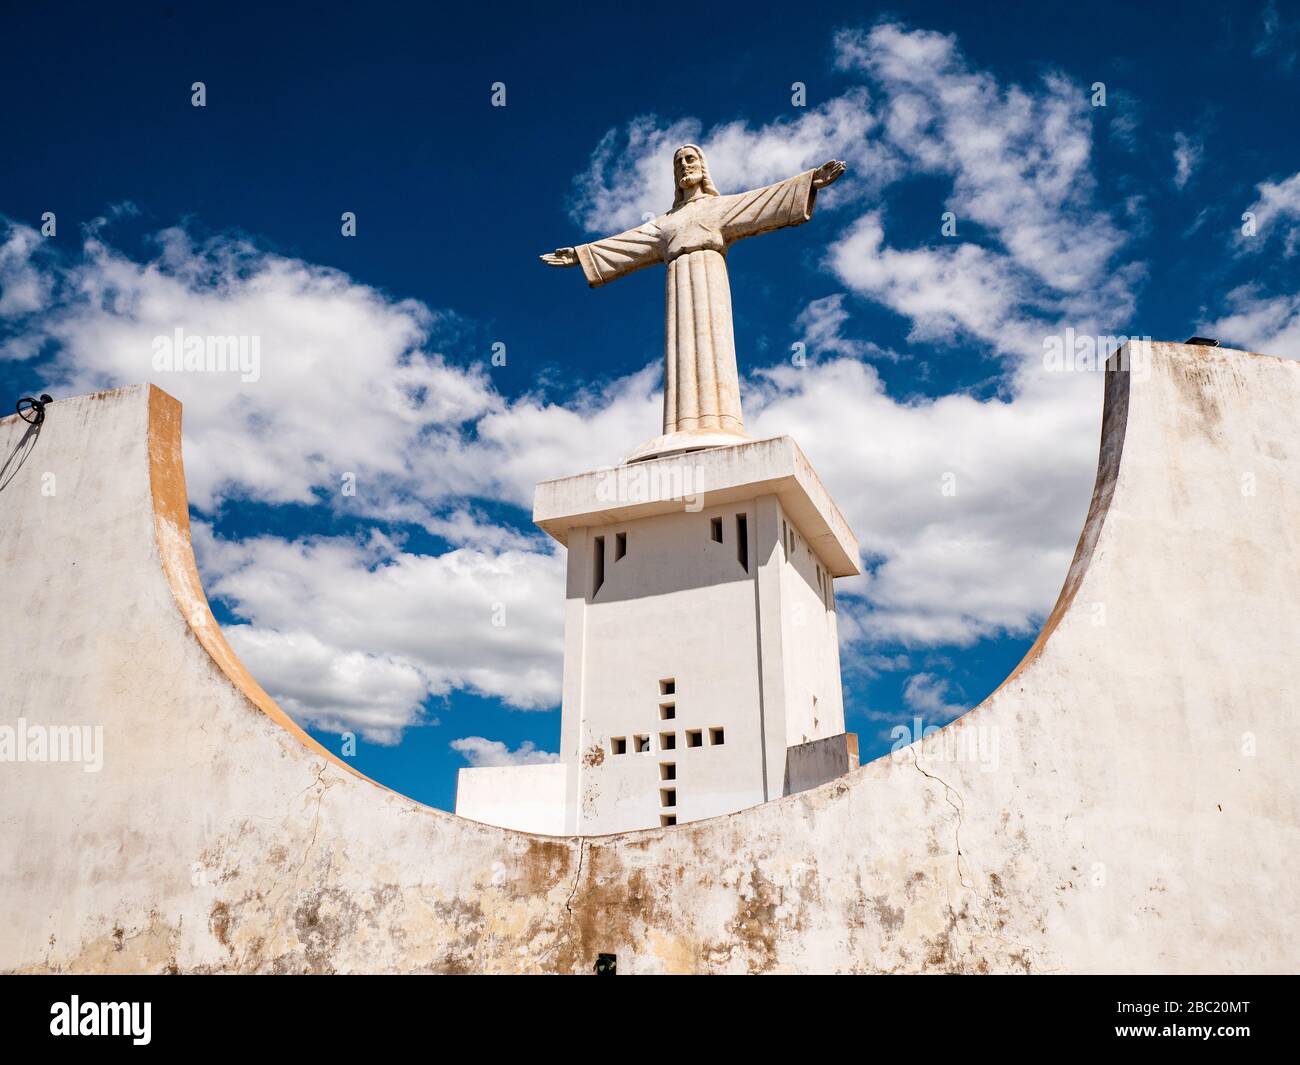 king christ statue on top of the hill in Lubango, angola Stock Photo